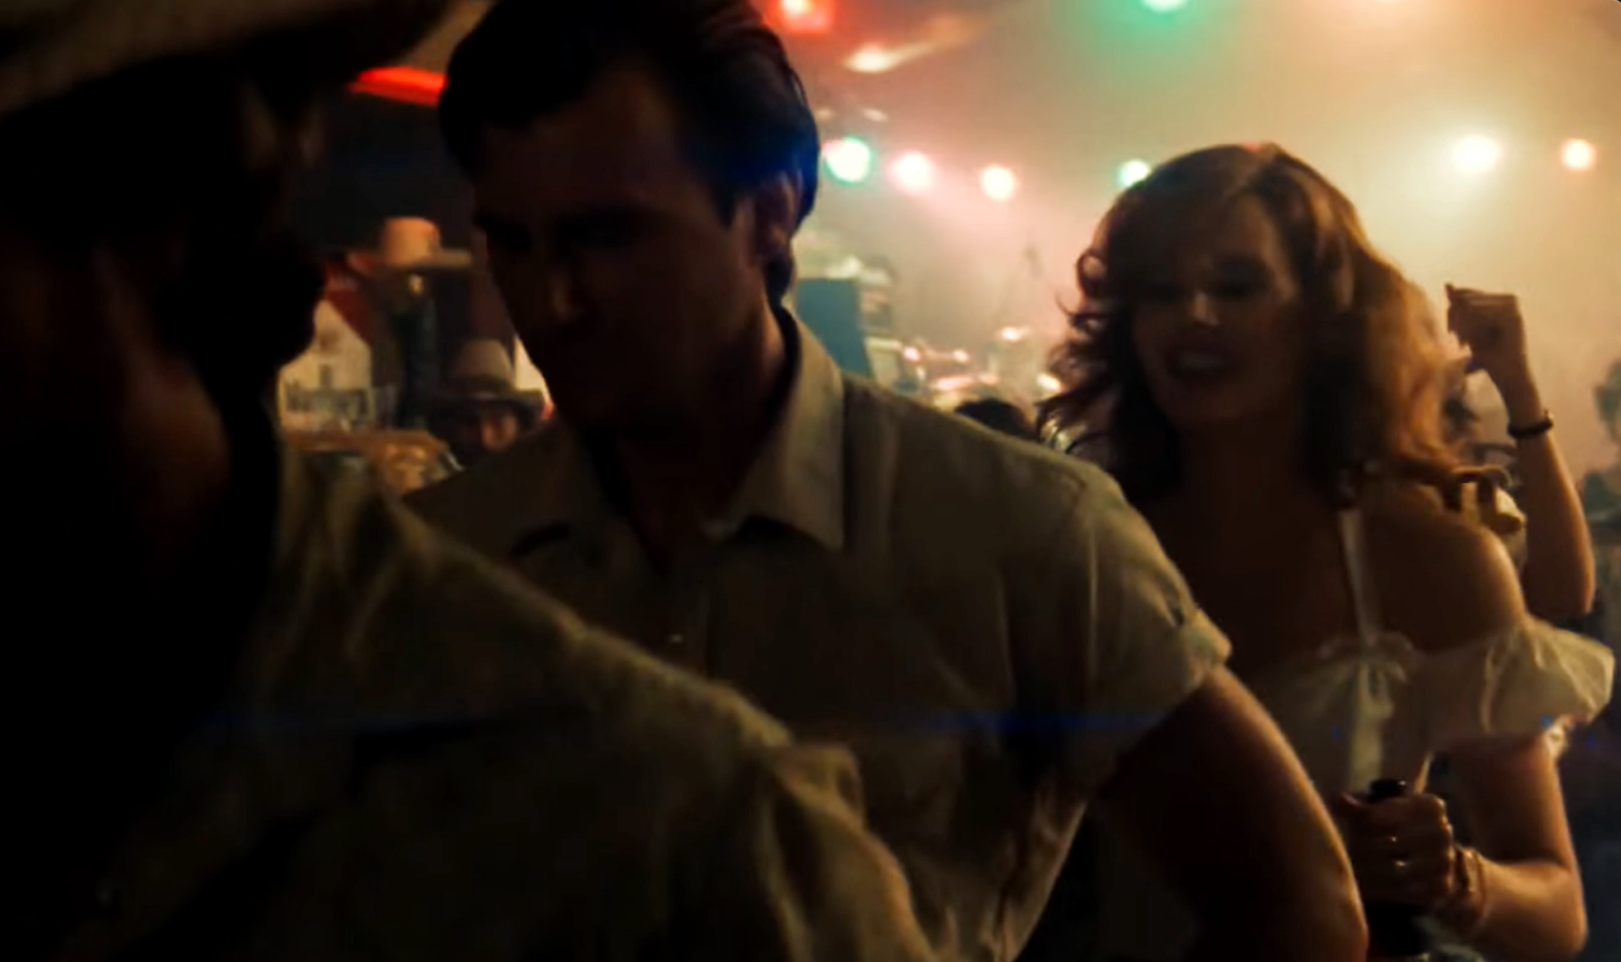 film still from Thelma & Louise depicting two line-dancing men silhouetted left of frame while woman dances behind them, surrounded by hazy multicolor lights